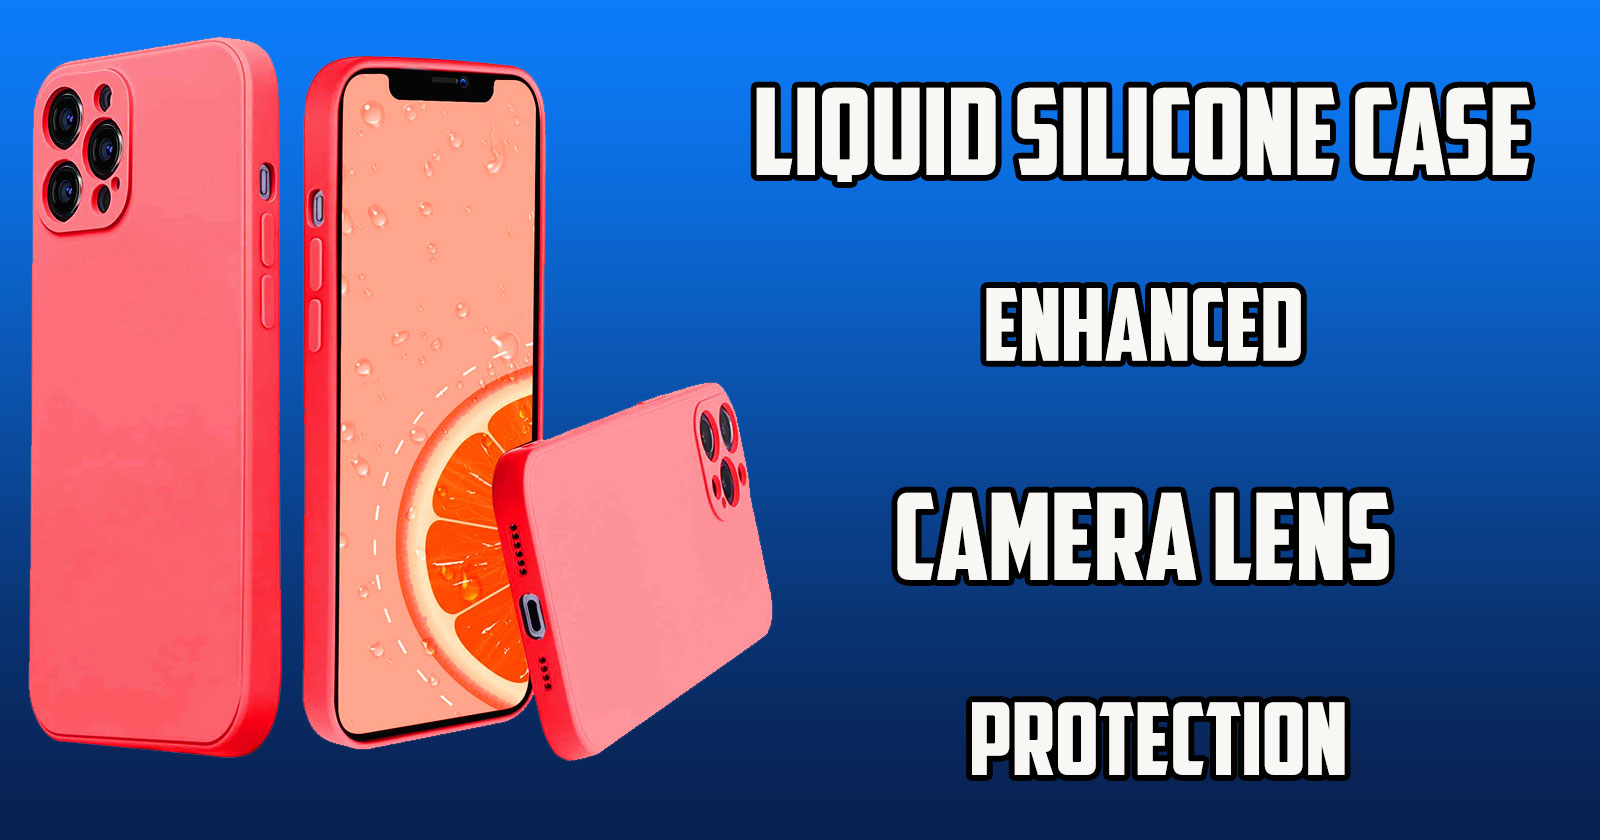 Liquid Silicone Case Enhanced Camera Lens Protection Cover for Samsung Galaxy Note 20 Ultra